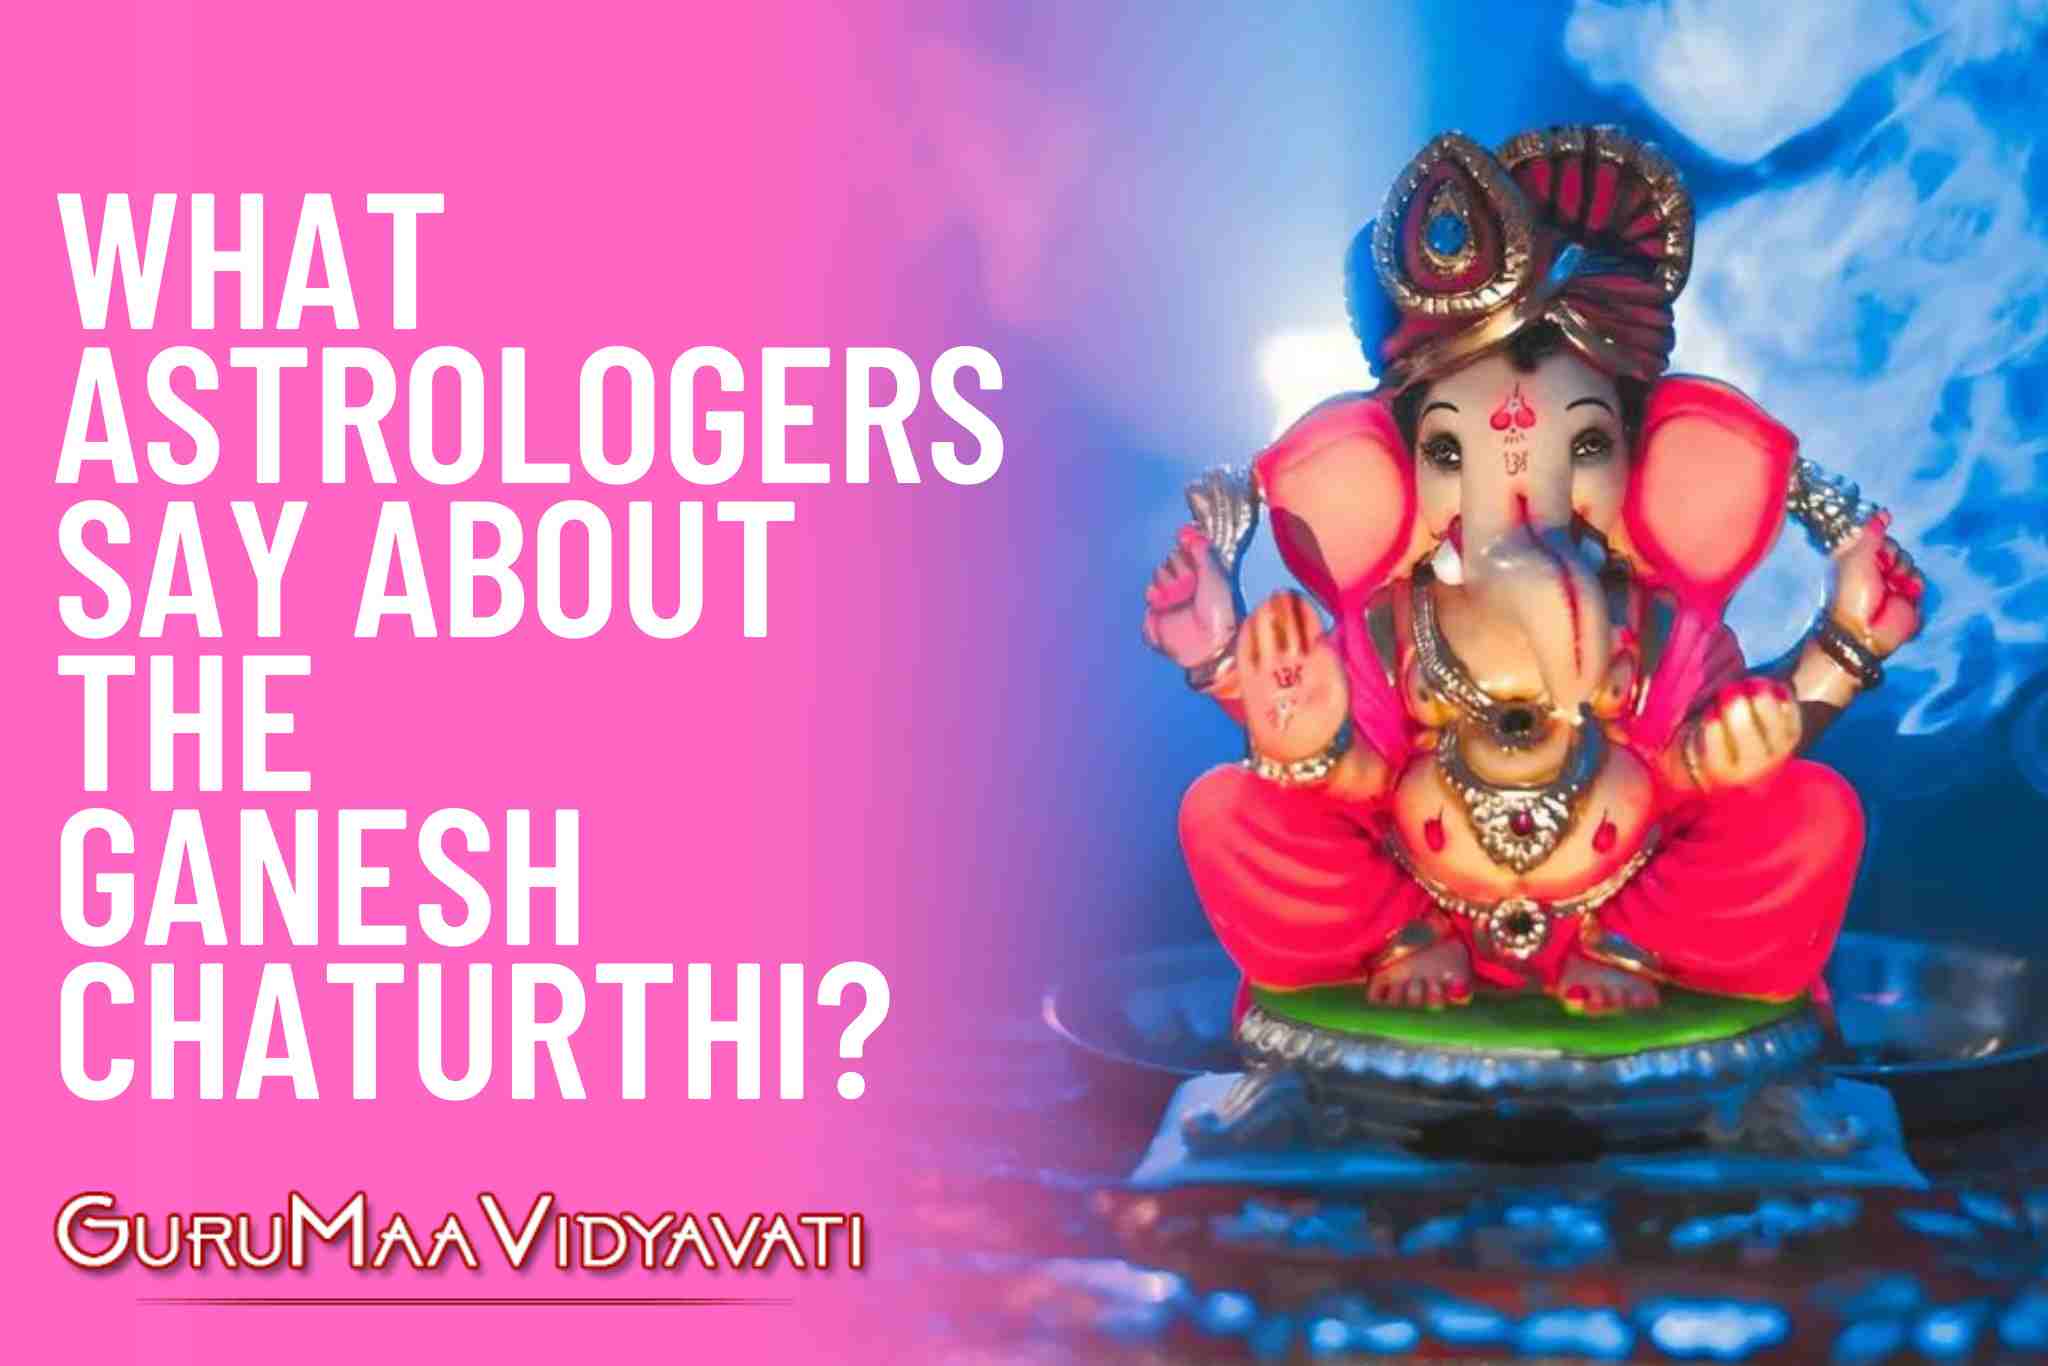 What Astrologers Say About the Ganesh Chaturthi?